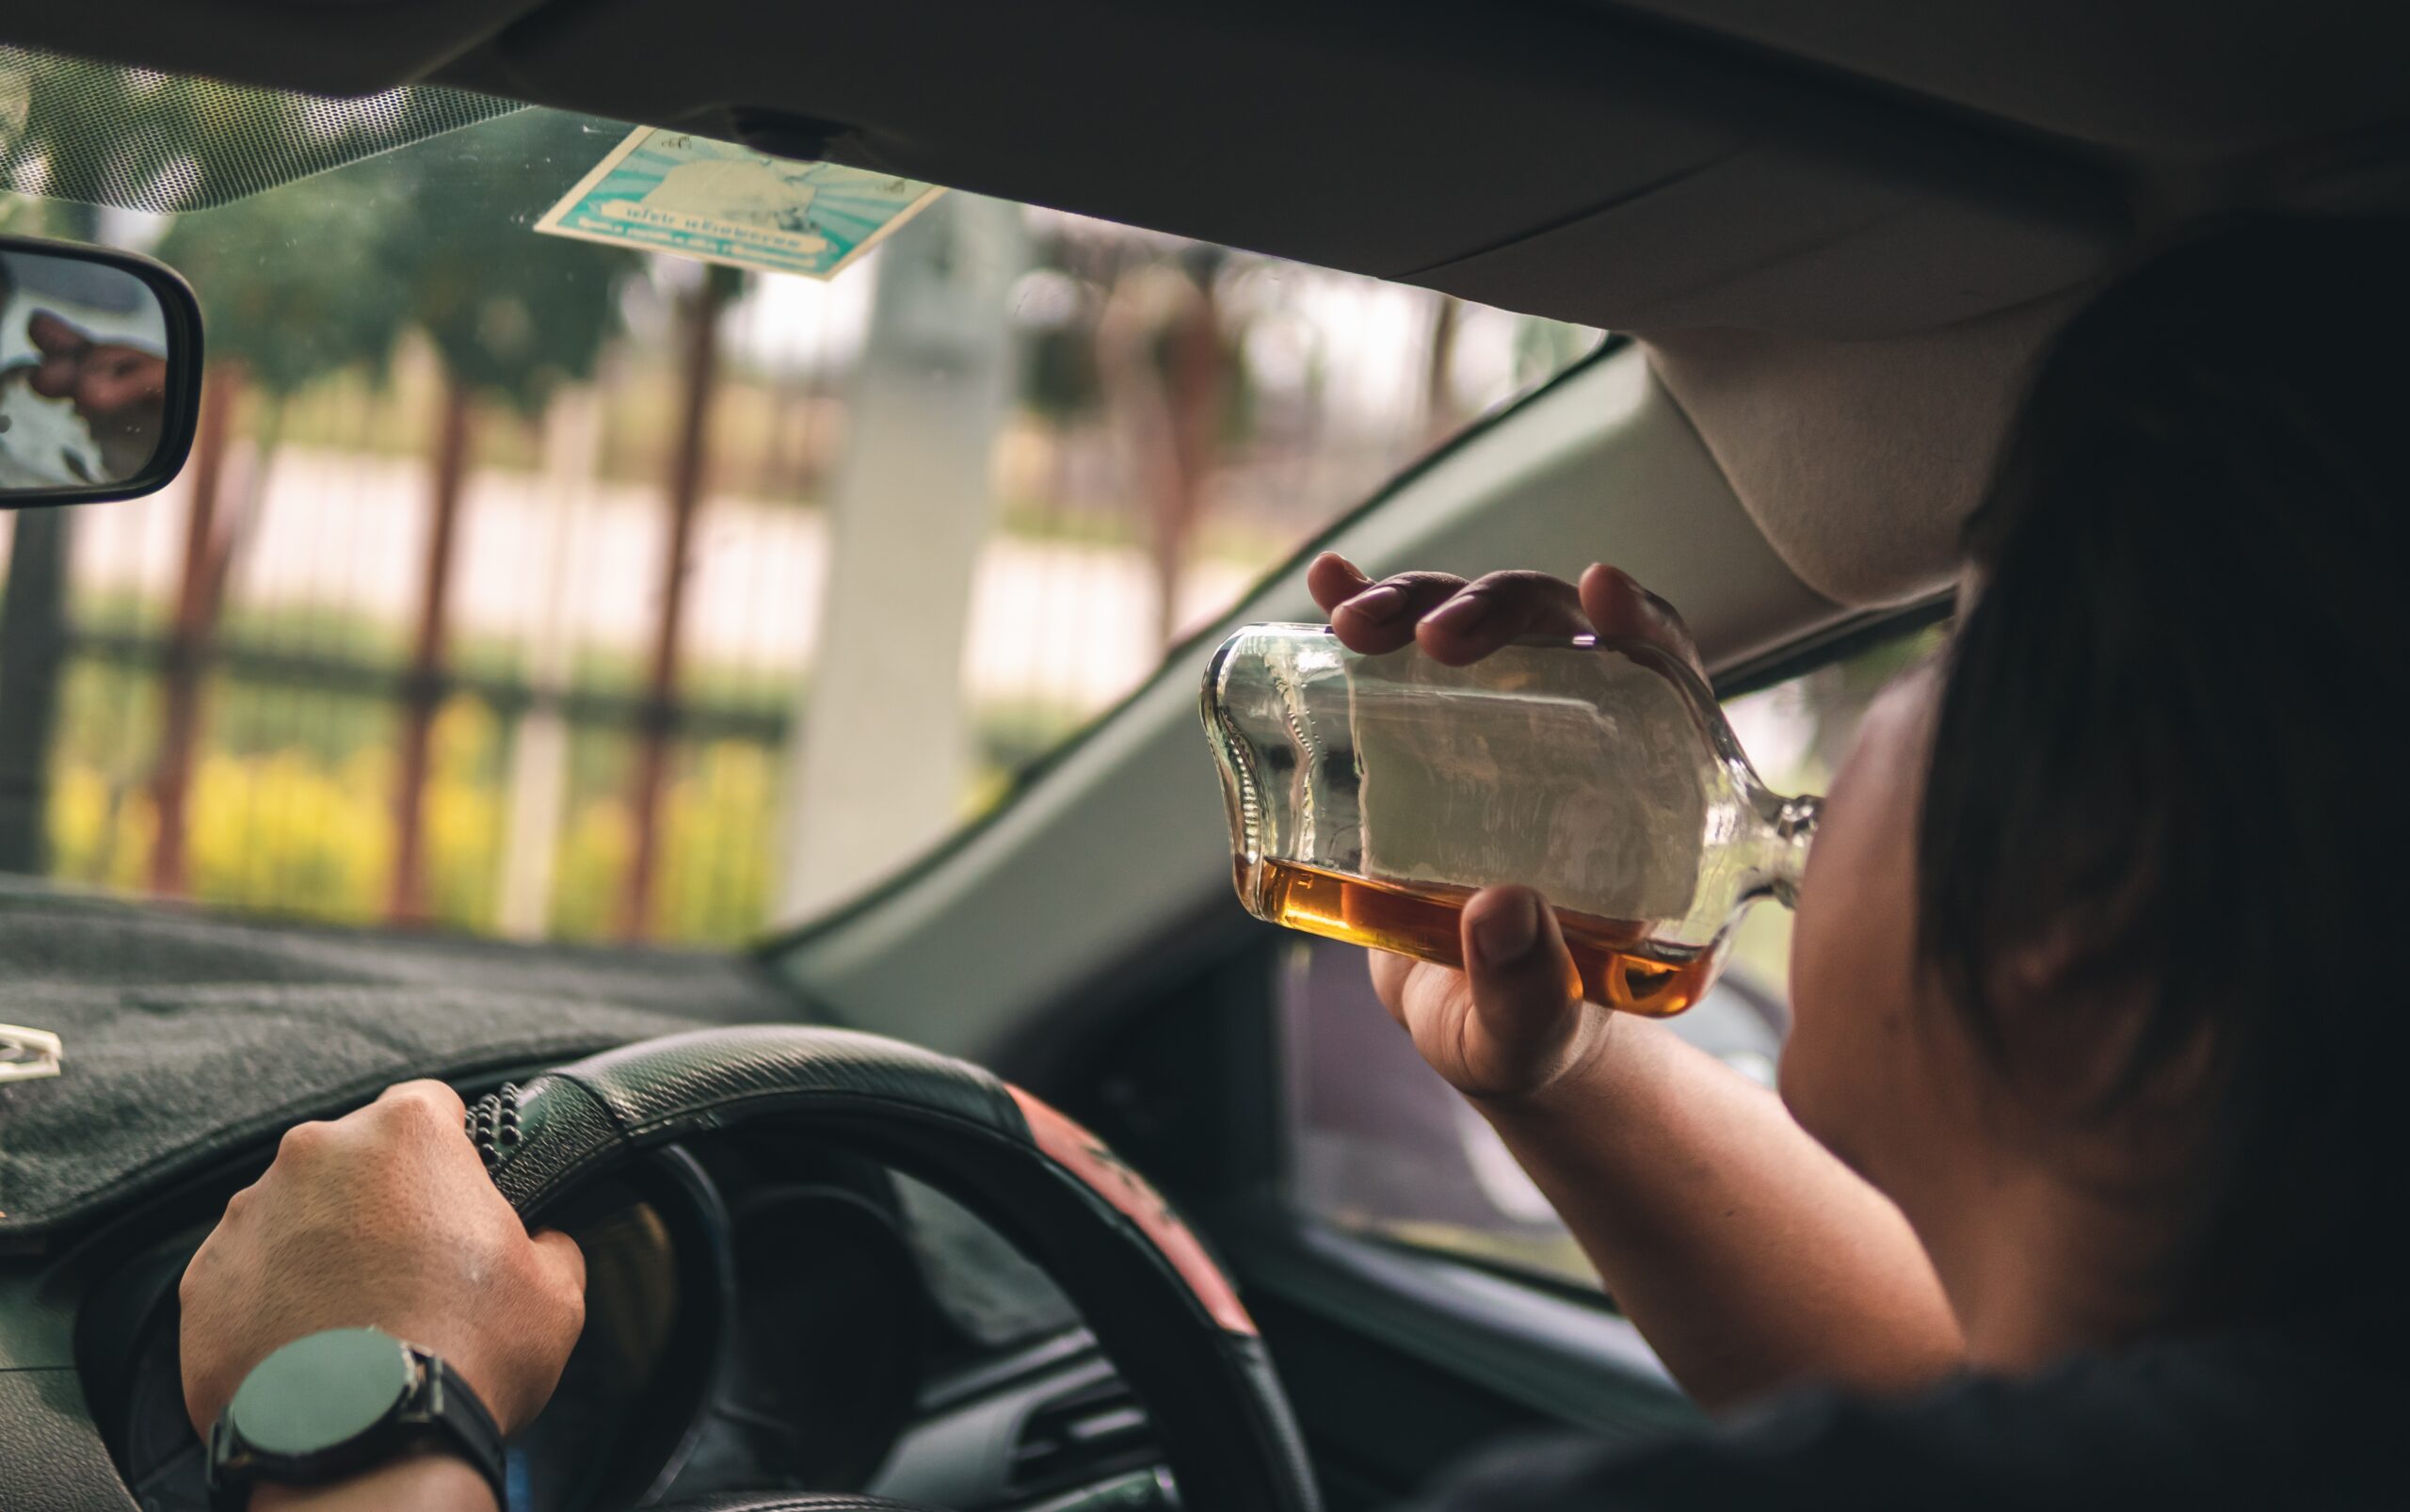 Featured Image for: How to Collect Evidence after a Drunk Driving Car Accident